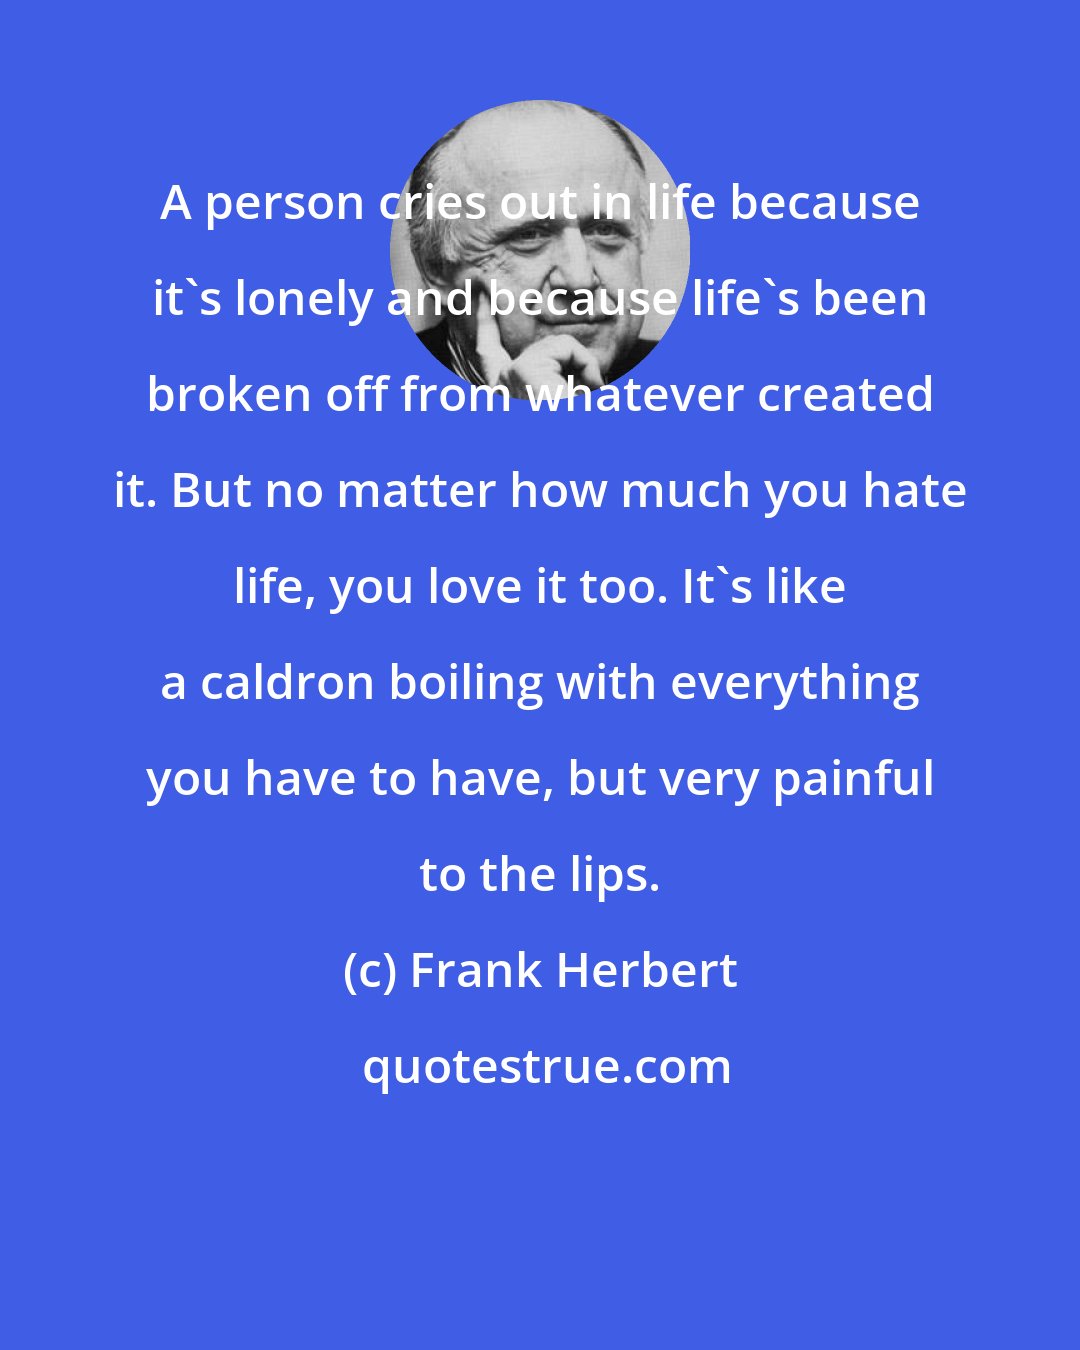 Frank Herbert: A person cries out in life because it's lonely and because life's been broken off from whatever created it. But no matter how much you hate life, you love it too. It's like a caldron boiling with everything you have to have, but very painful to the lips.